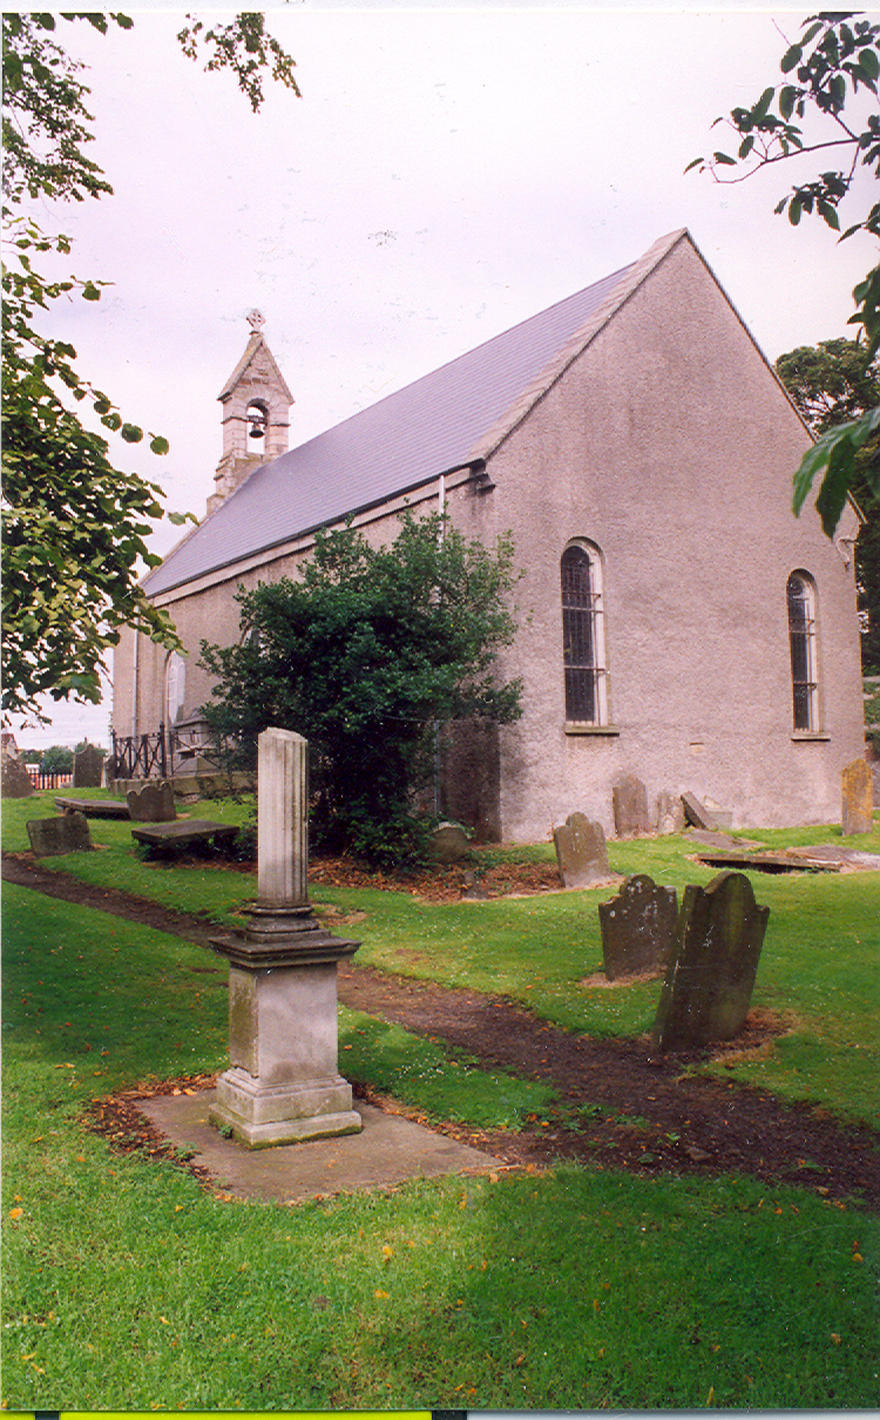 St Pappan’s Church, Santry in the parish of Santry, Glasnevin and Finglas